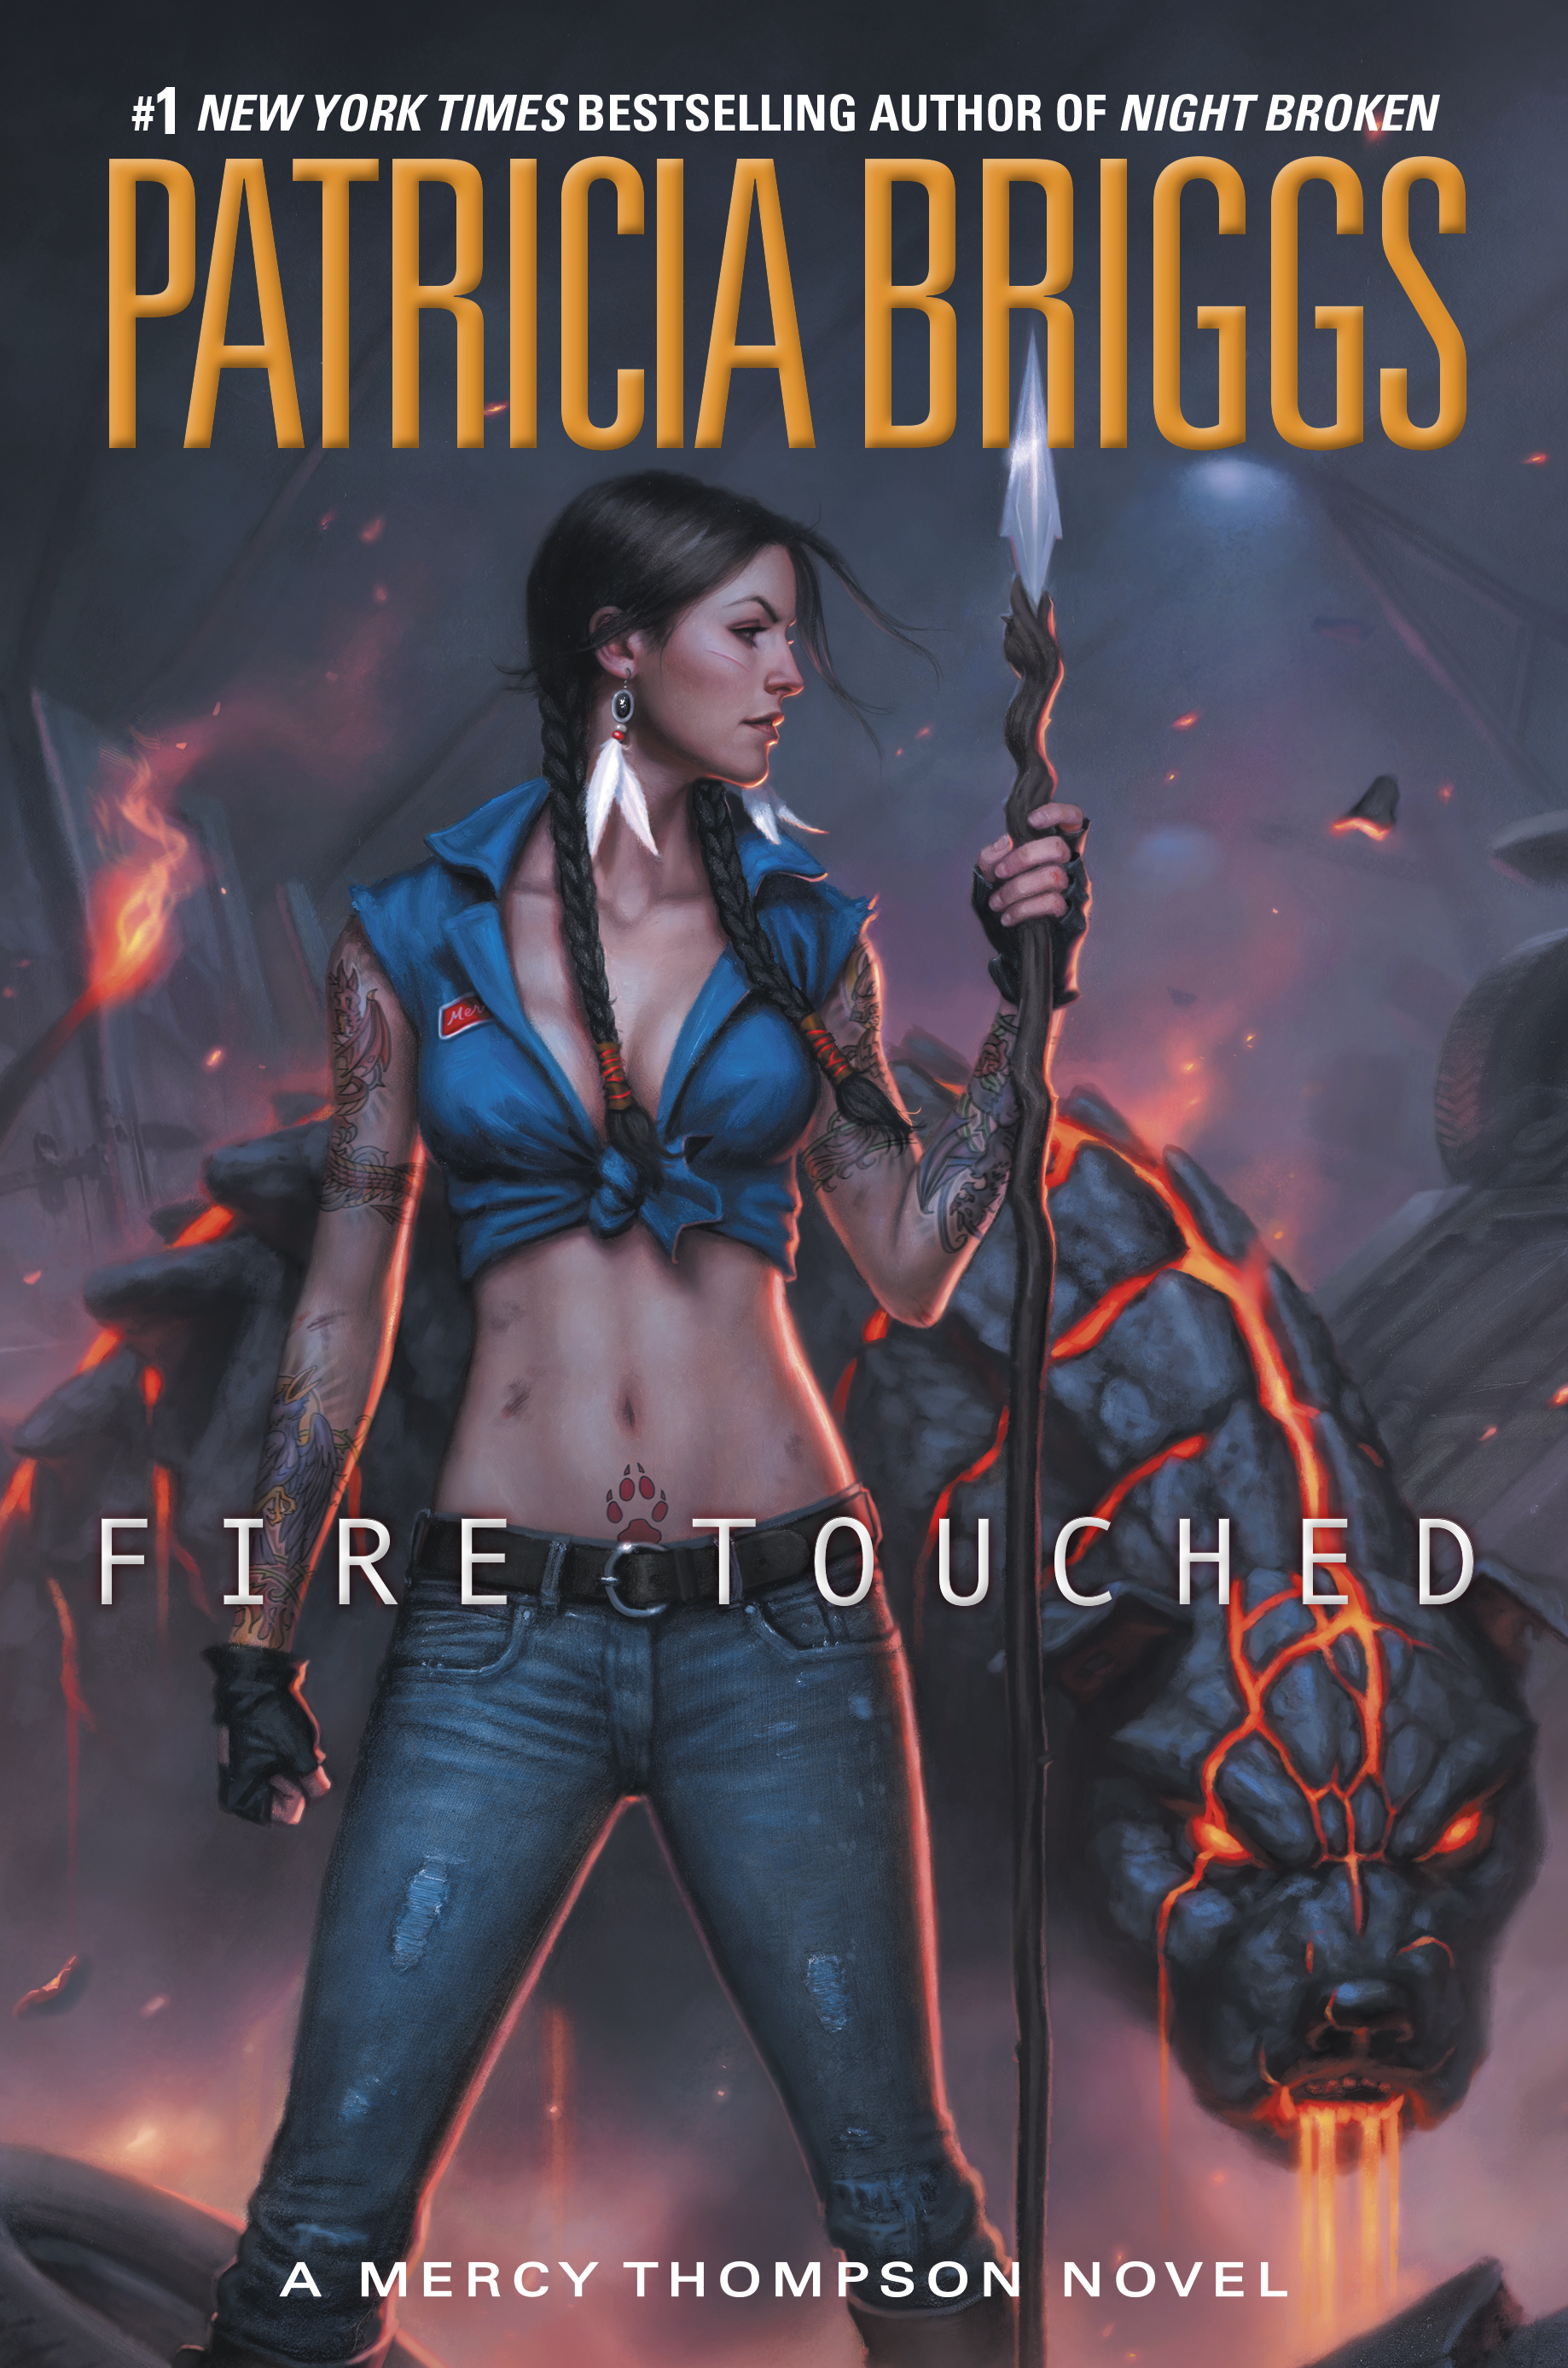 Firefight (Book), The Reckoners Wiki